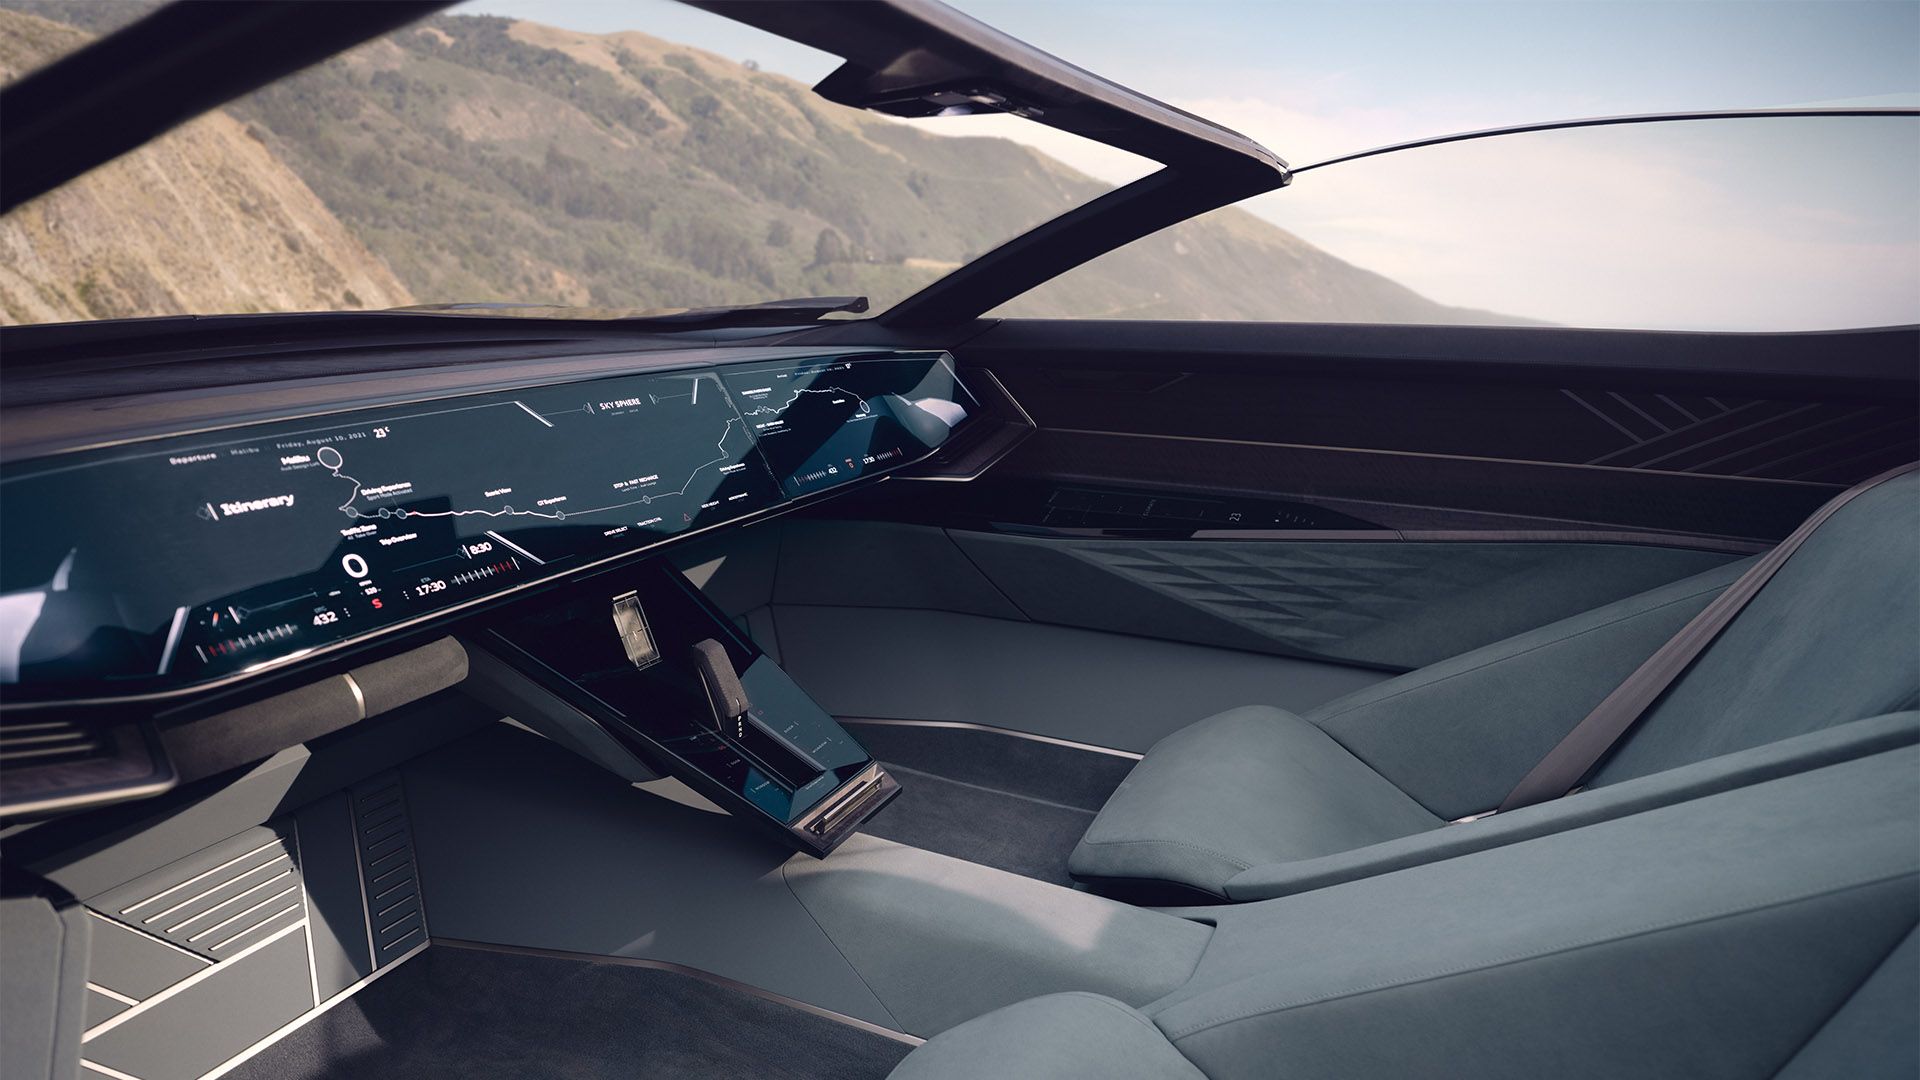 A side view of the Audi skysphere concept cockpit in “Grand Touring” mode.